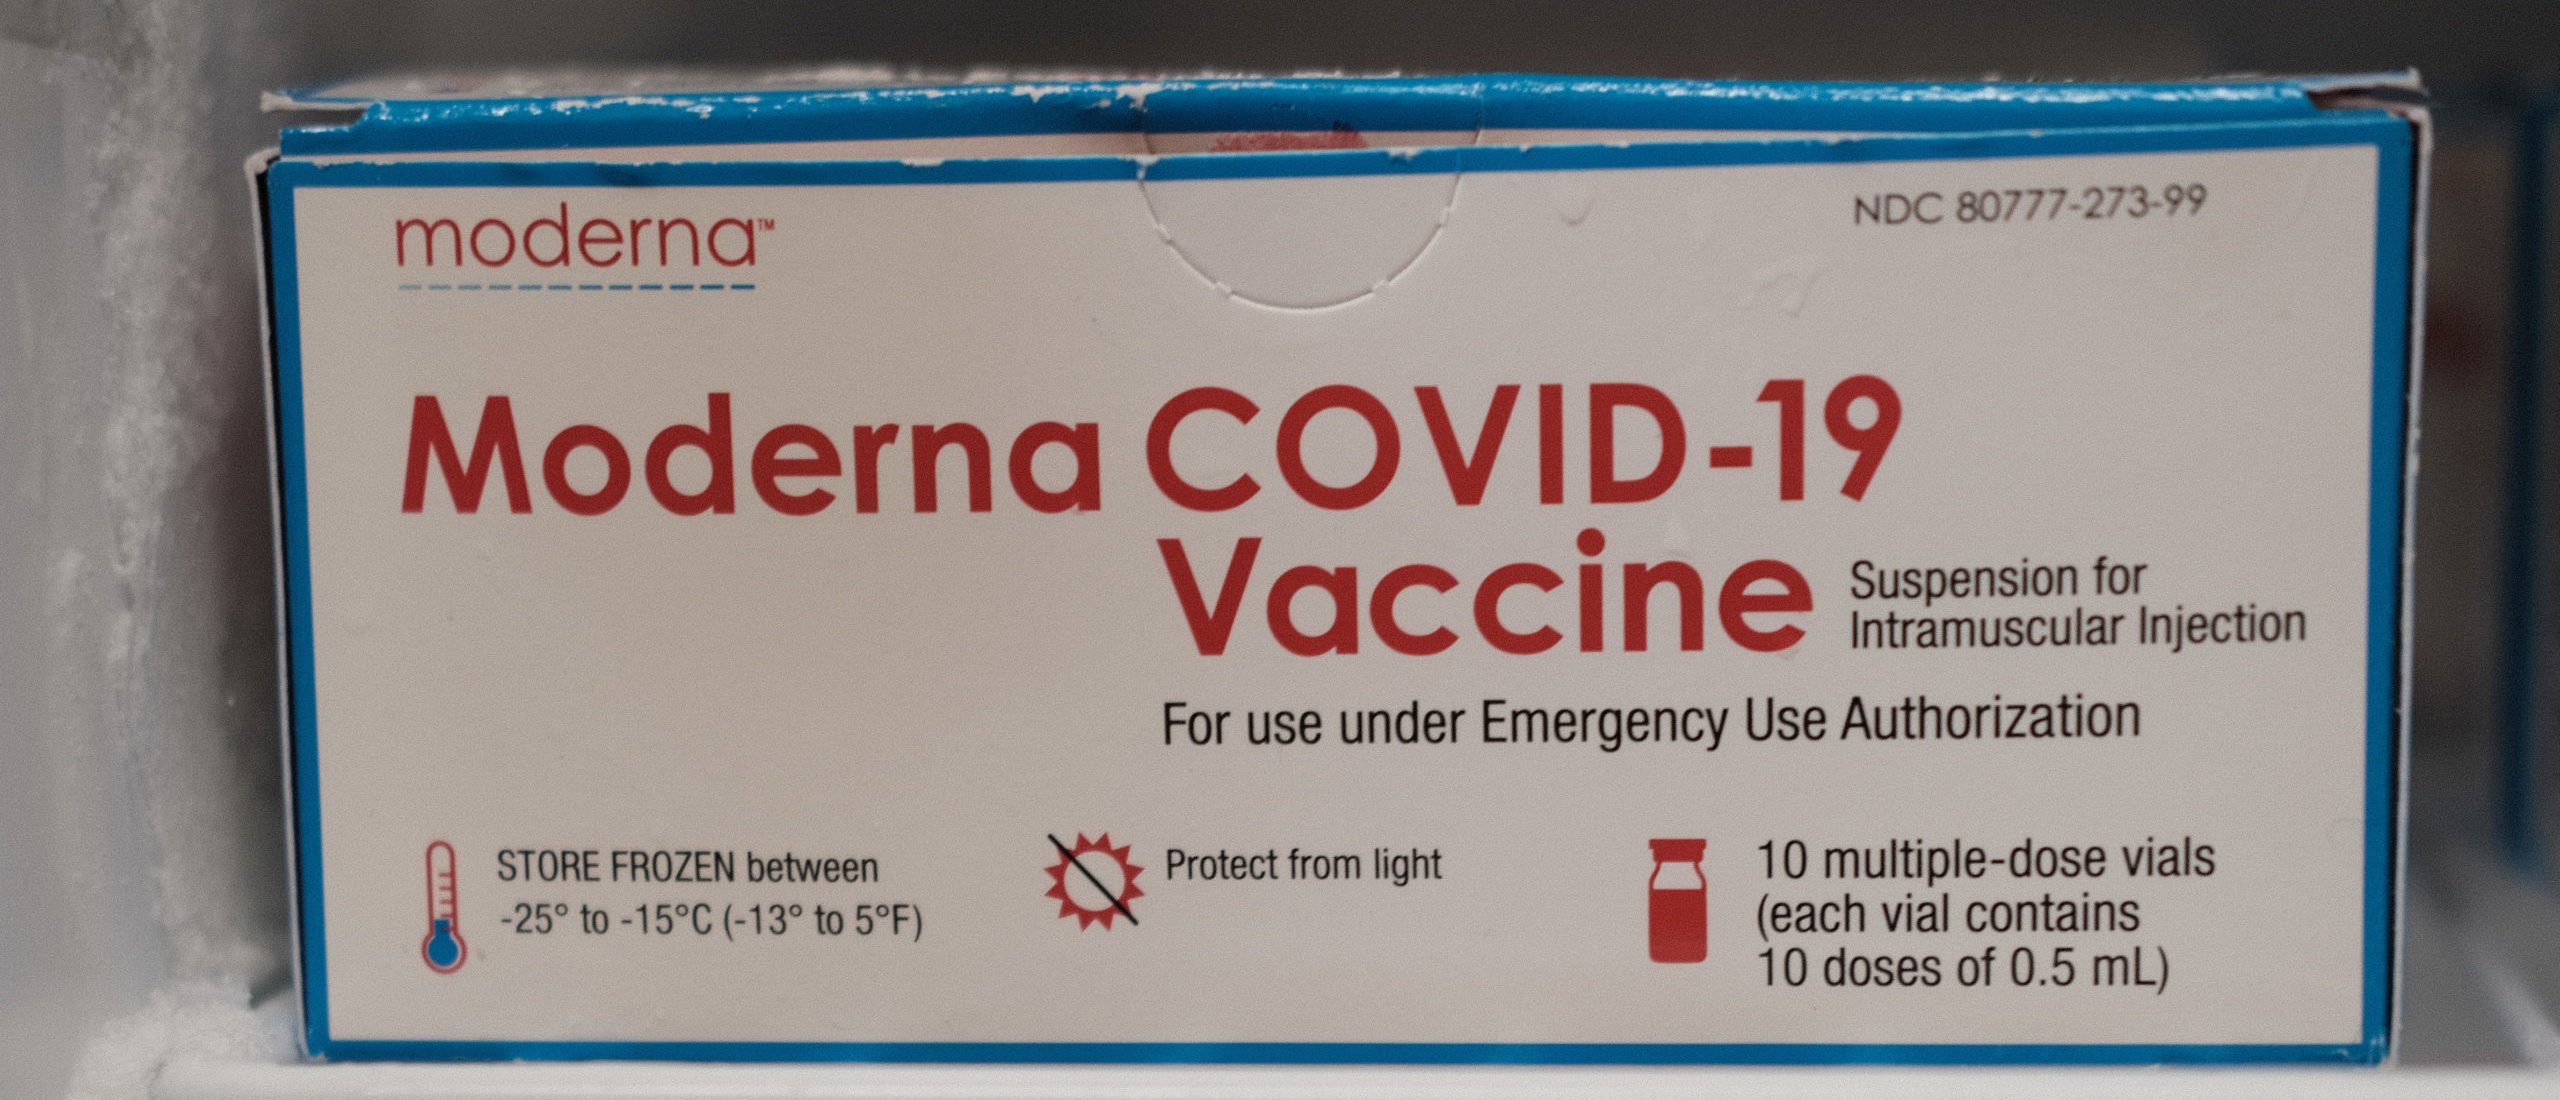 Pharmaceutical Giant Monitored Online Content Of Popular COVID-19 Vaccine Critics: REPORT